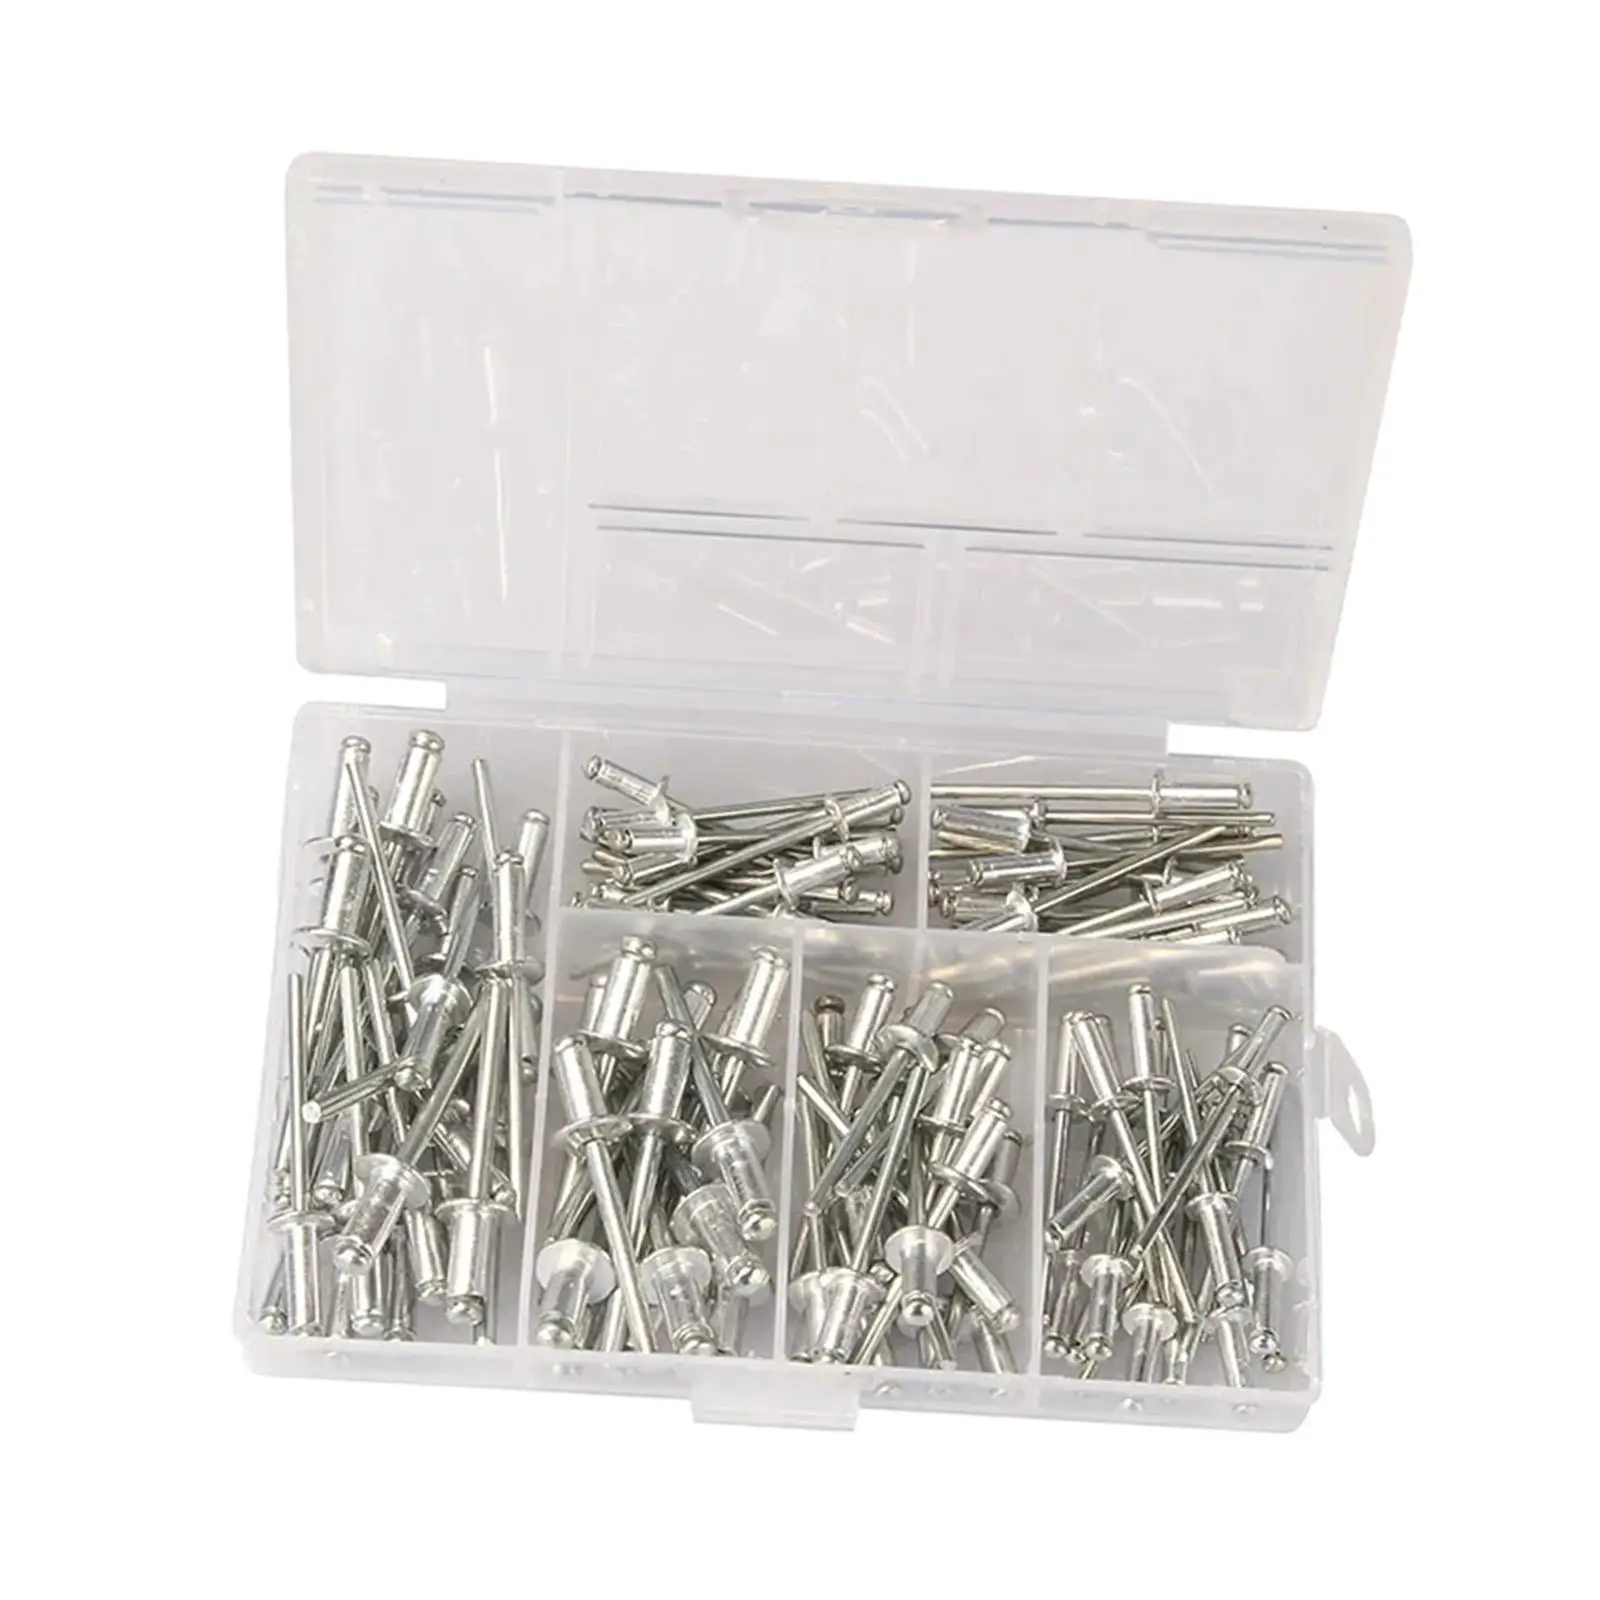 120x Blind Rivets Storage Case Portable Nail Pull for Installing Accessories Multipurpose Dome Head Heavy Duty Aluminum Rivets